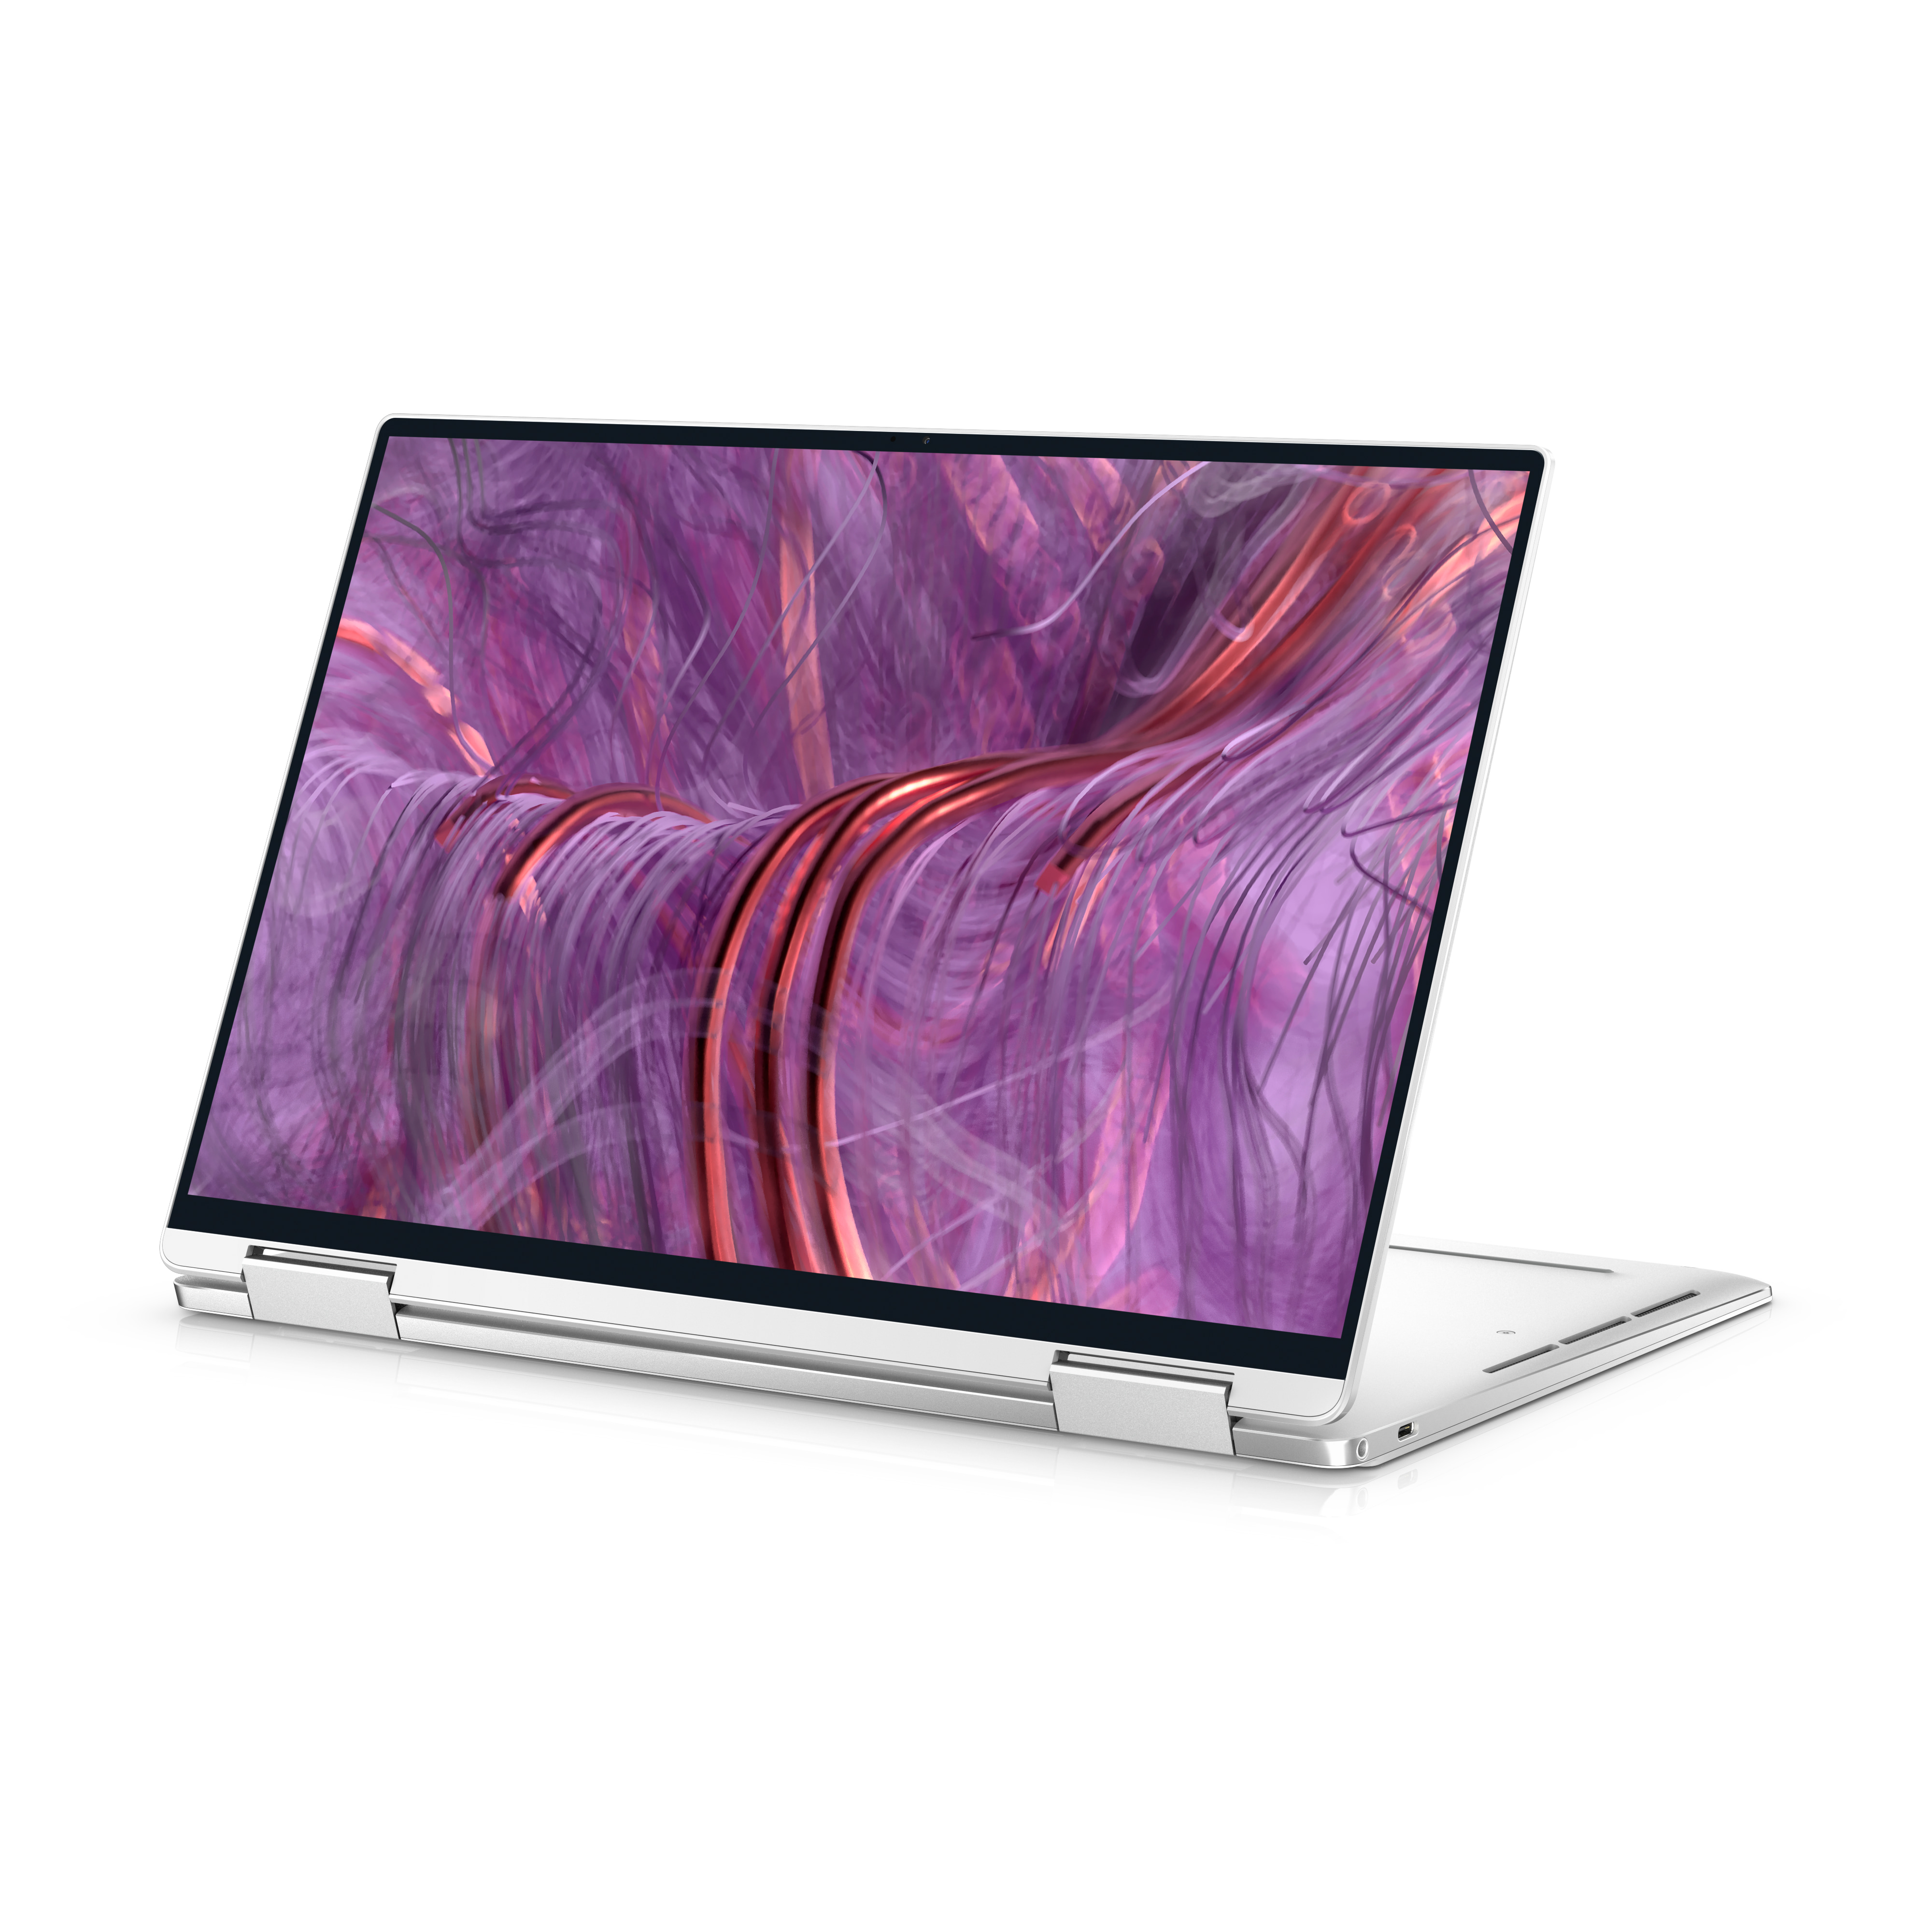 Dell XPS 13 2-in-1 Laptop | Dell 日本